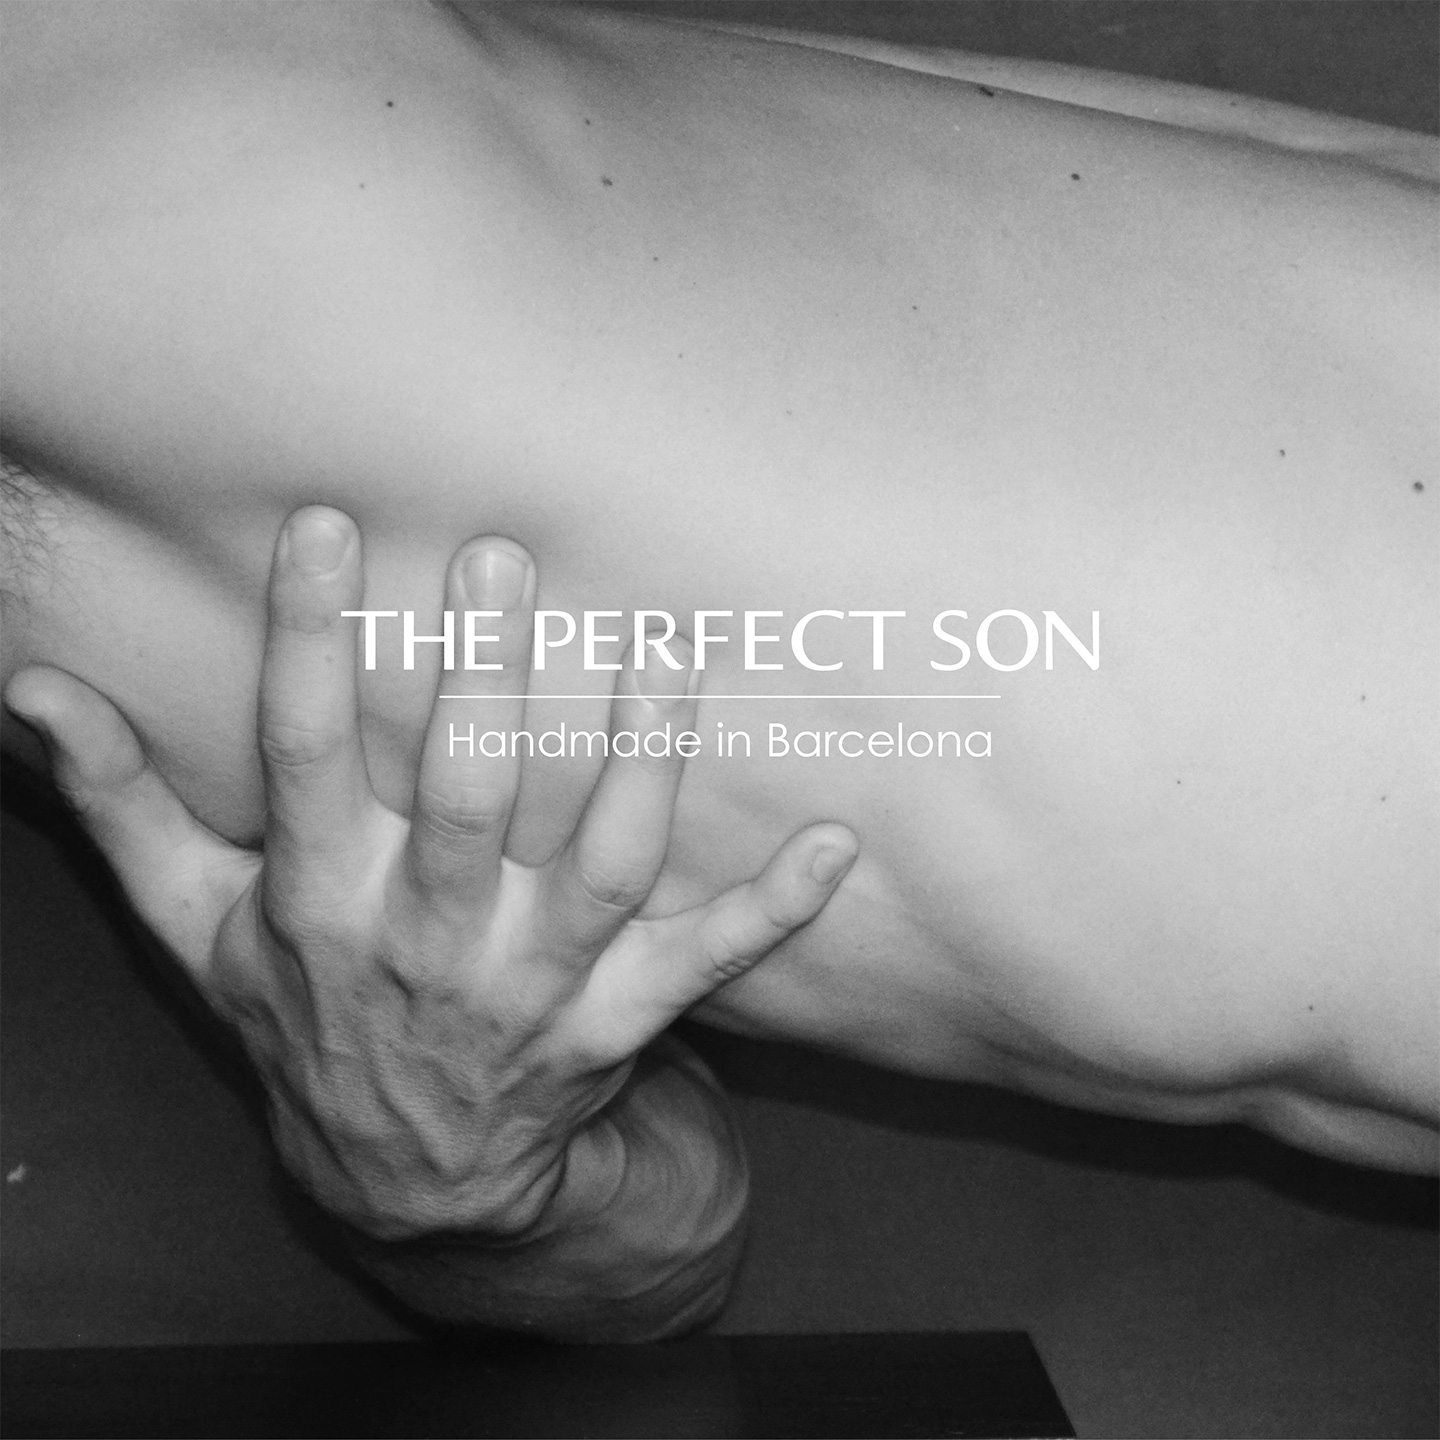 The international intimate fashion magazine CYL selected The Perfect Son